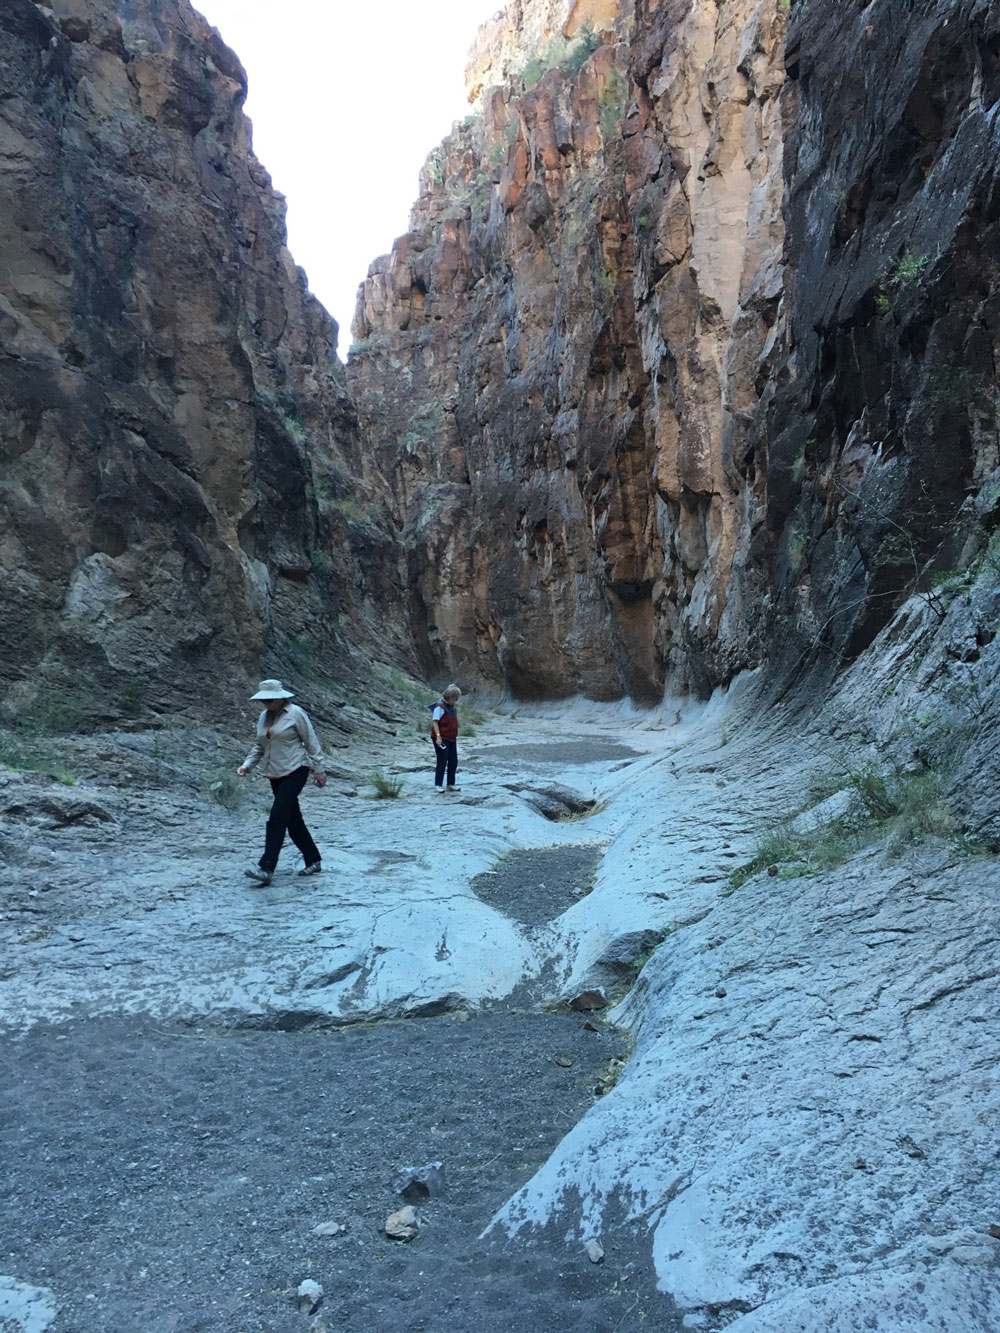 Guests hiking in the dry streambed at the bottom of Closed Canyon in the Big Bend Ranch State Park